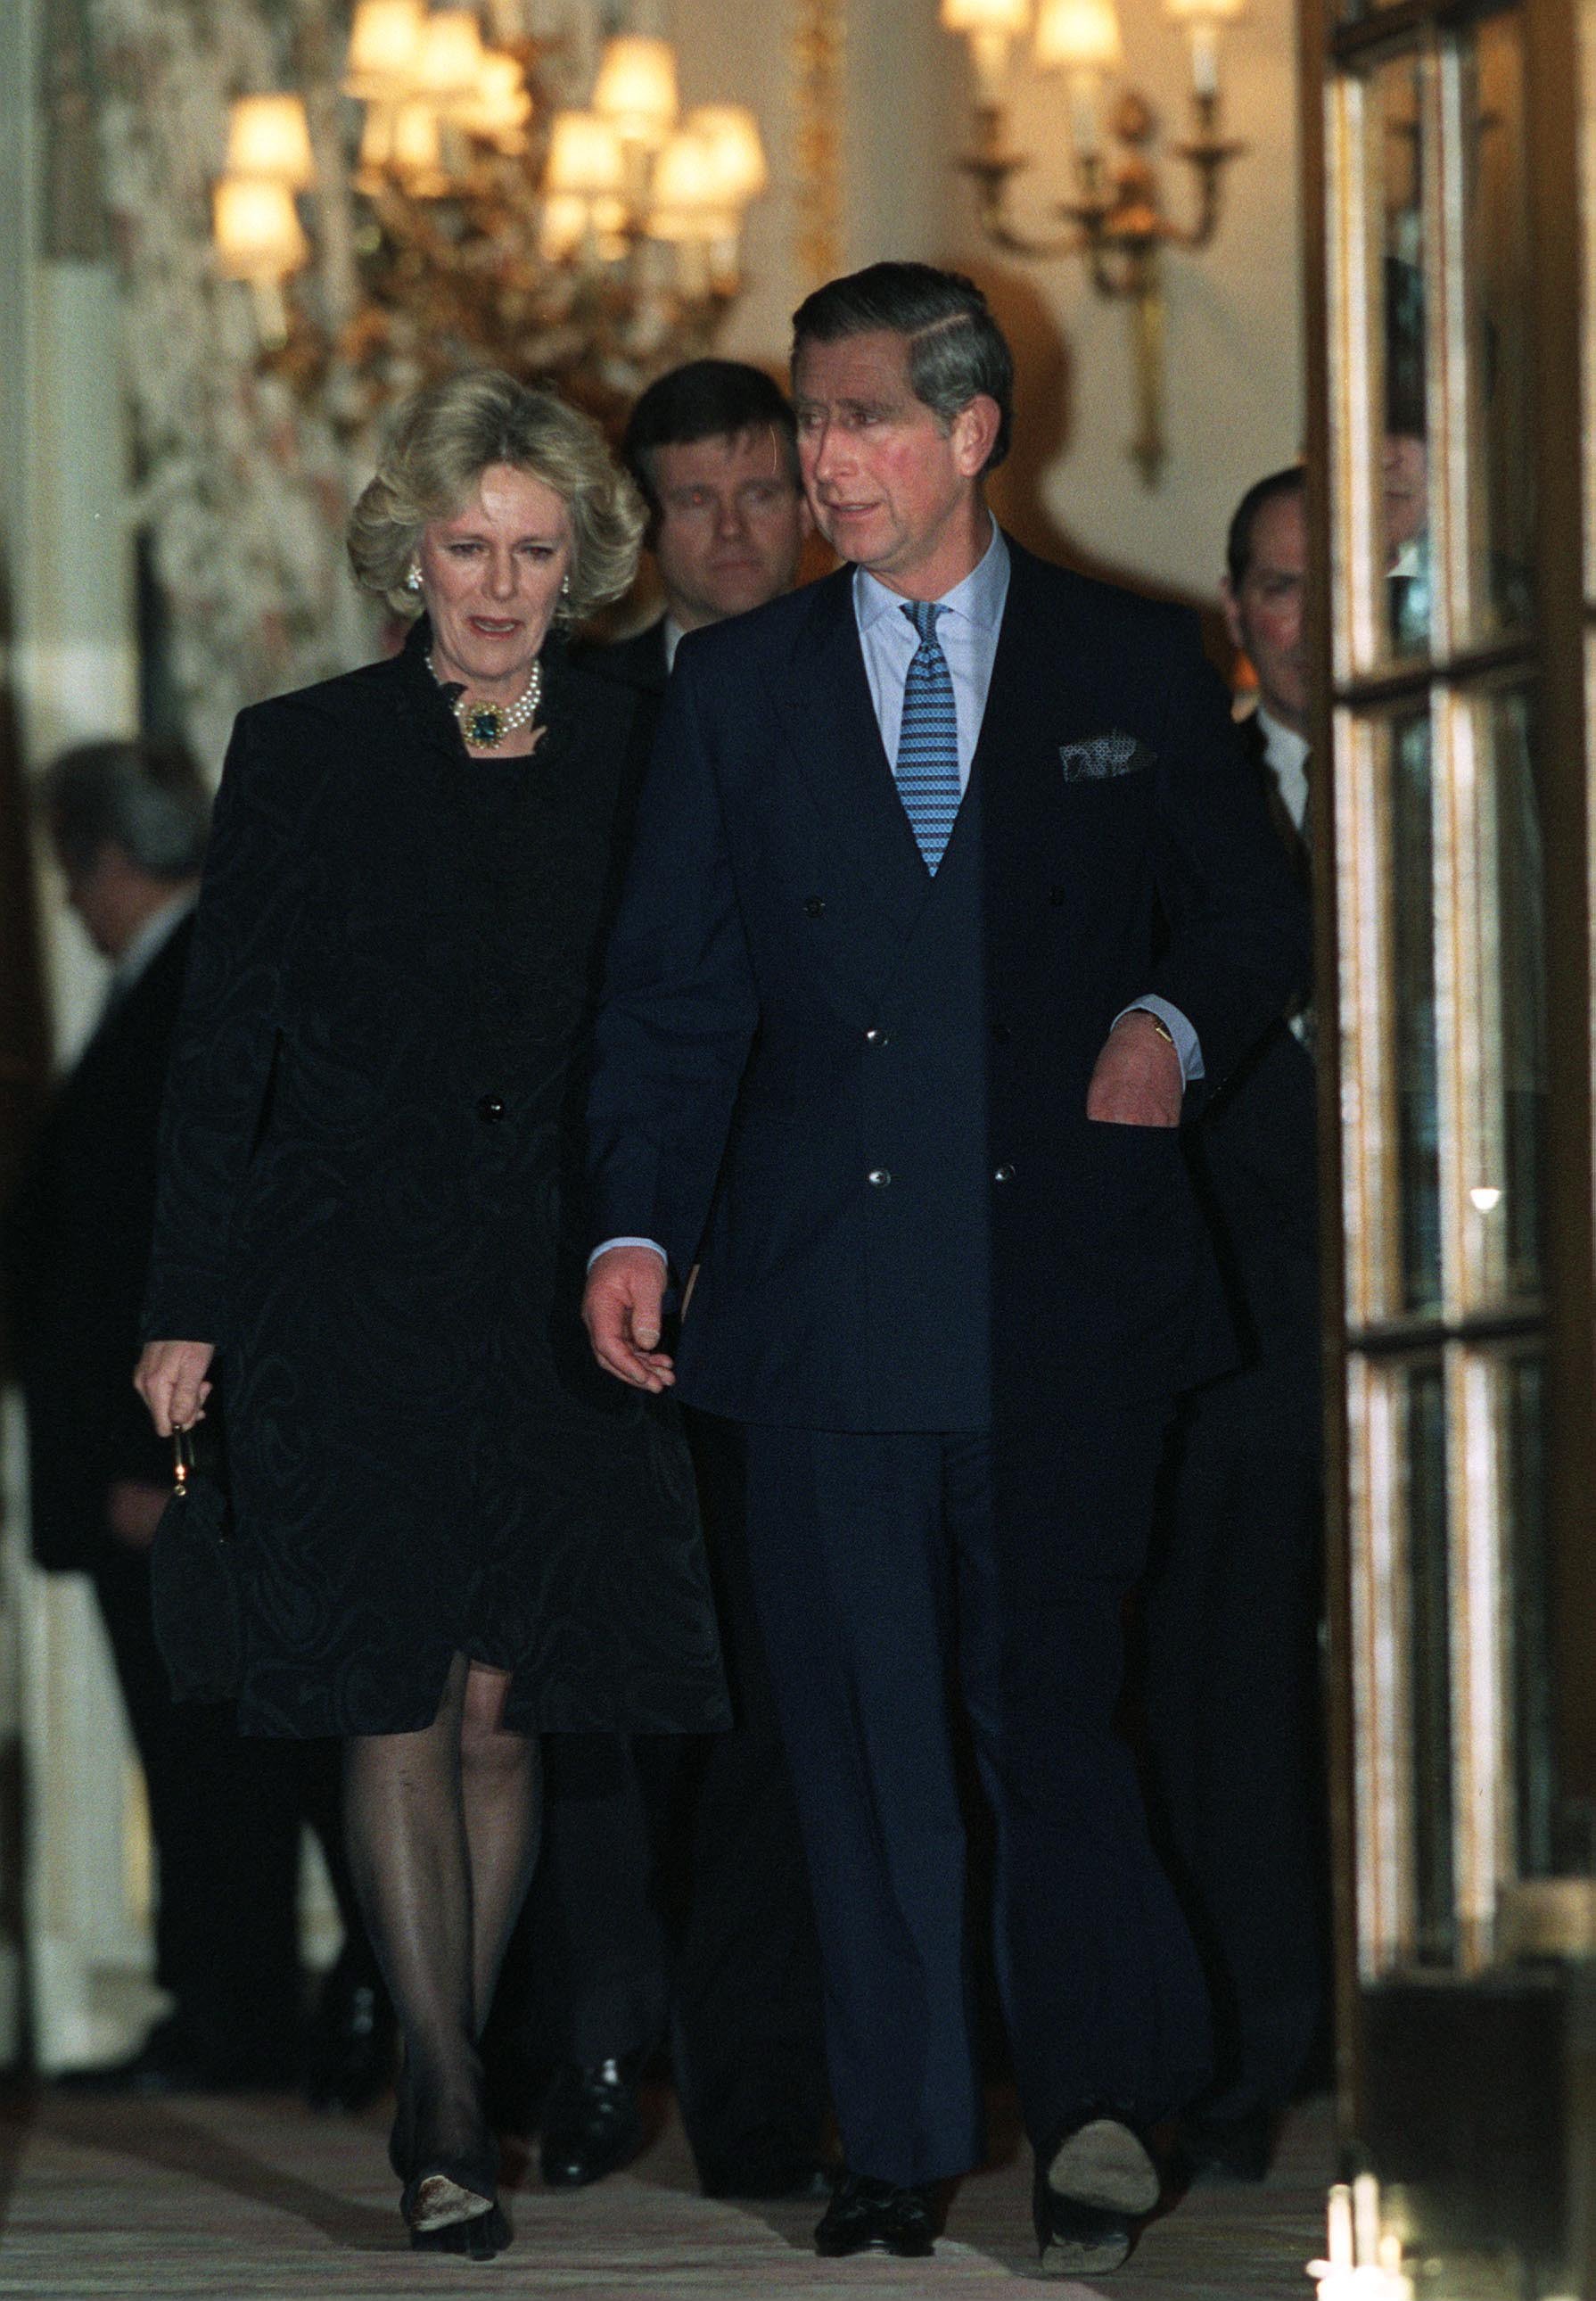 Prince Charles and his wife Camilla Parker-Bowles seen leaving the Ritz Hotel in London. / Source: Getty Images